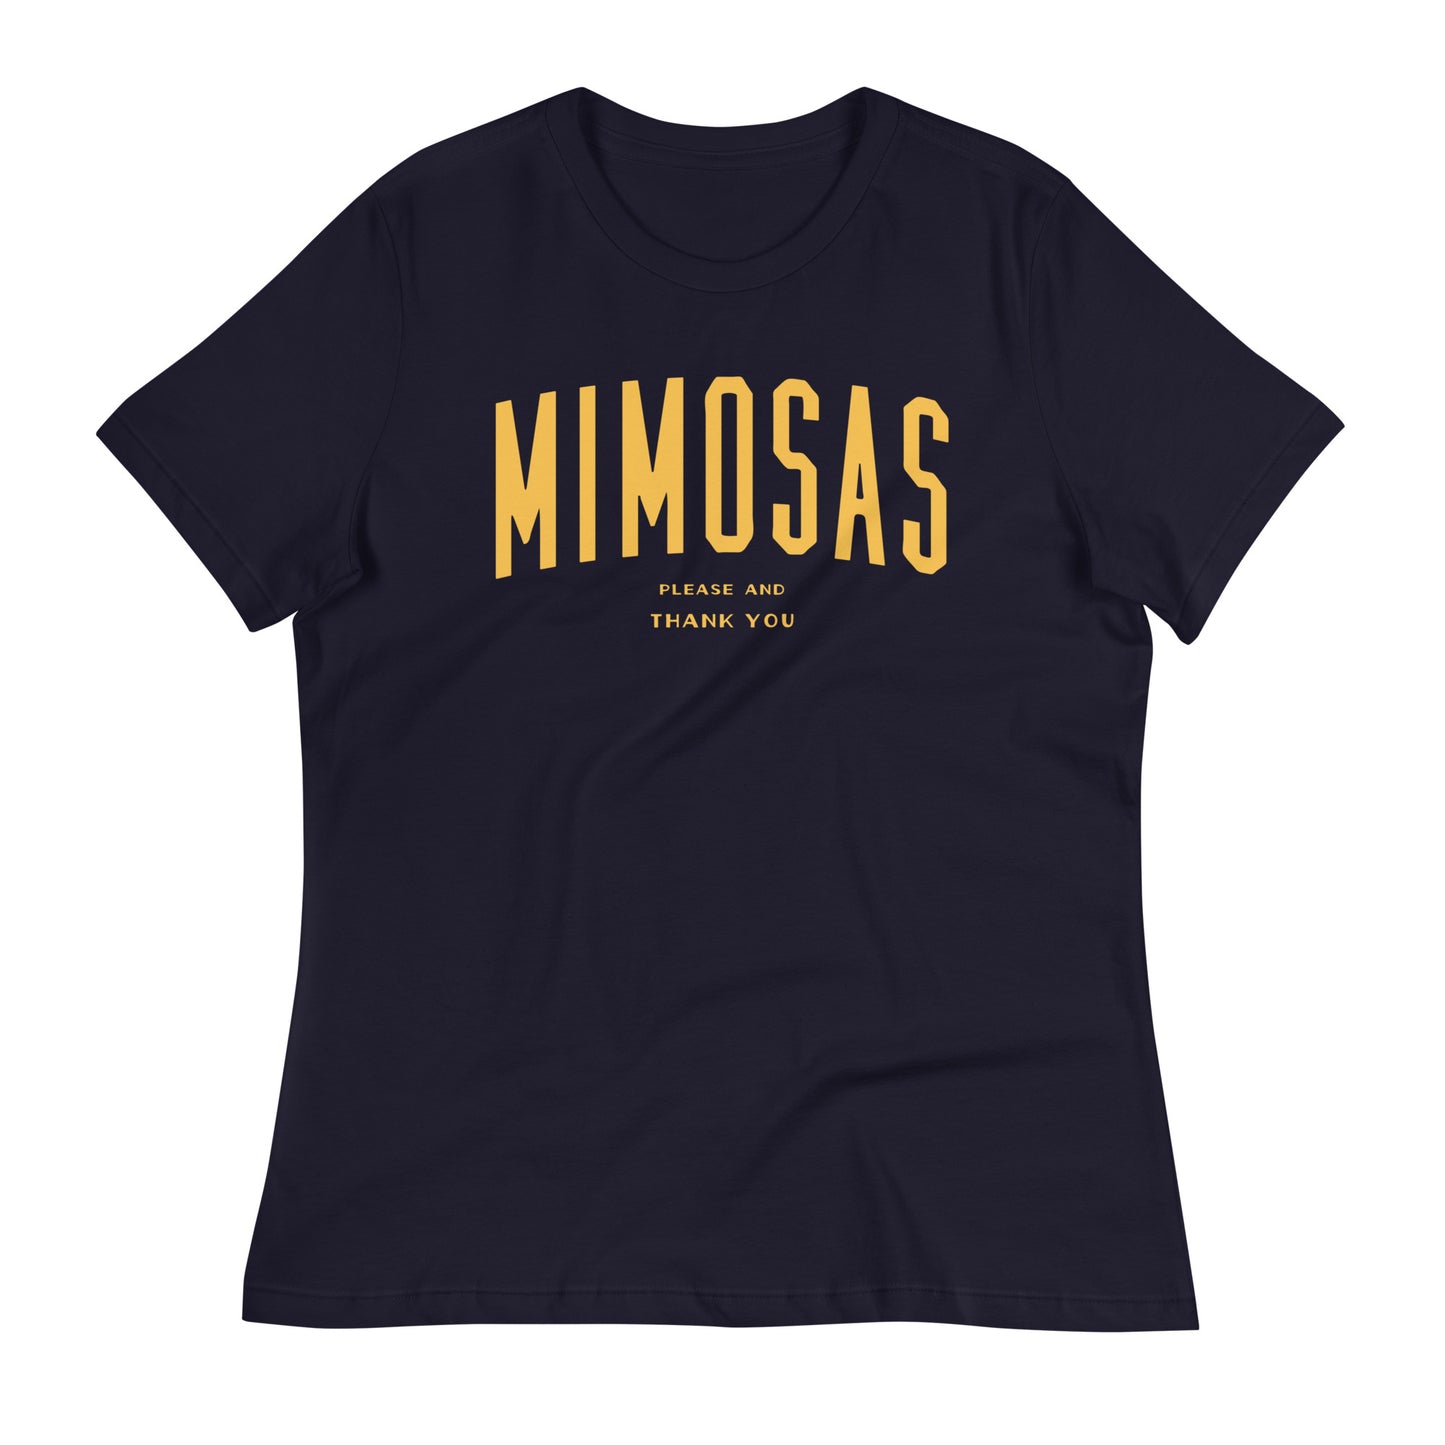 Mimosas Please And Thank You Women's Signature Tee